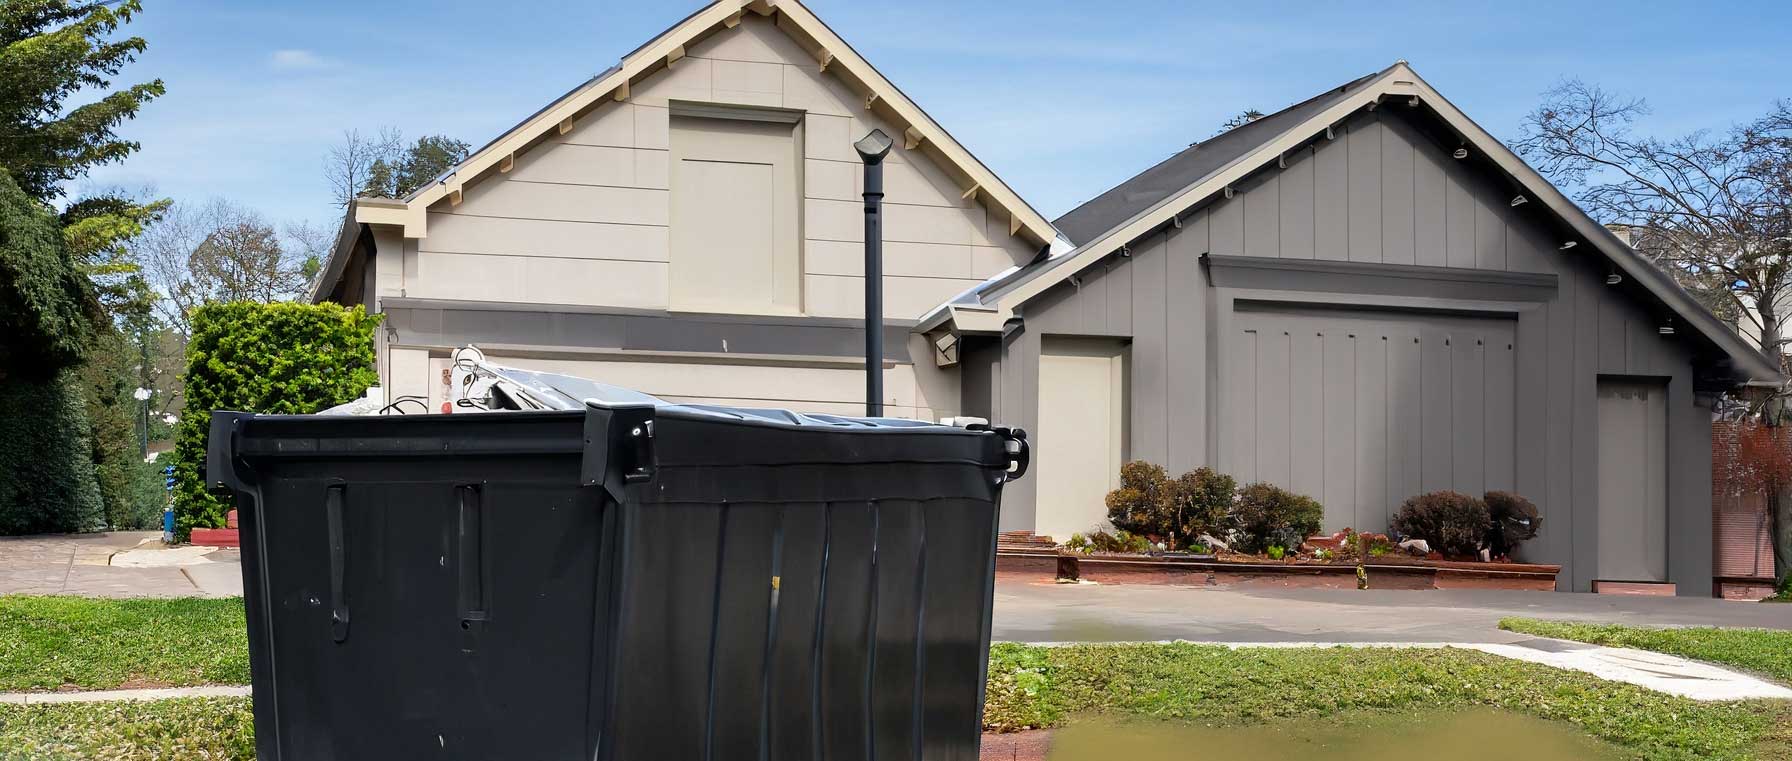 Choosing the Right Size Dumpster: 15 or 30 Yard Box?